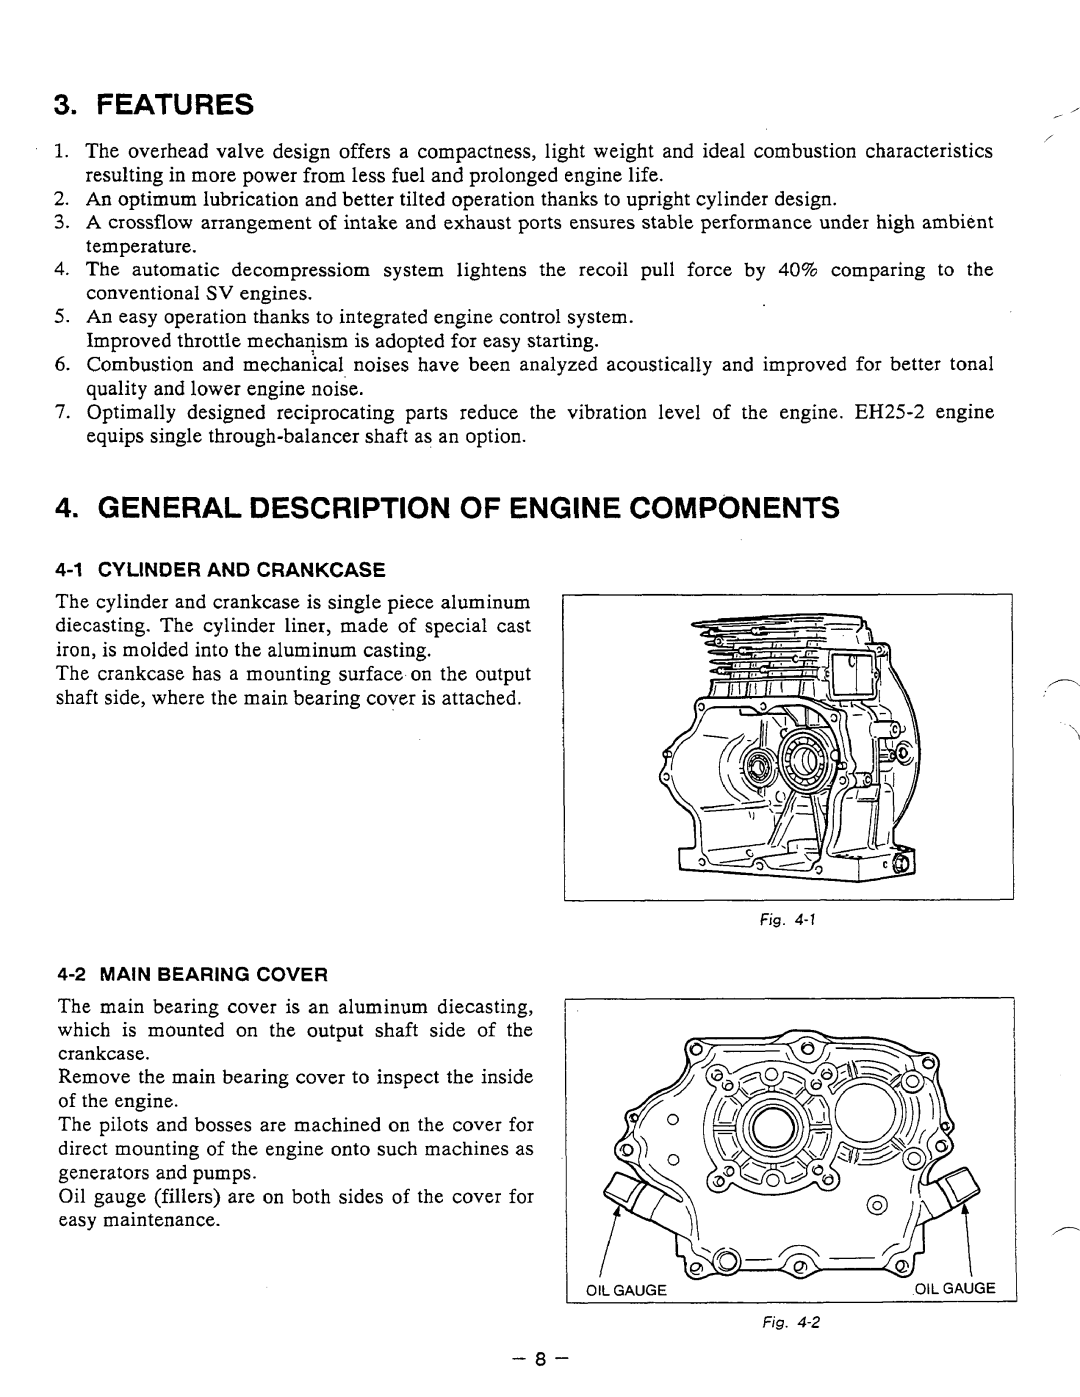 Subaru Robin Power Products EH12-2, EH17-2, EH25-2 manual Features, General Descriptionof Engine Components 